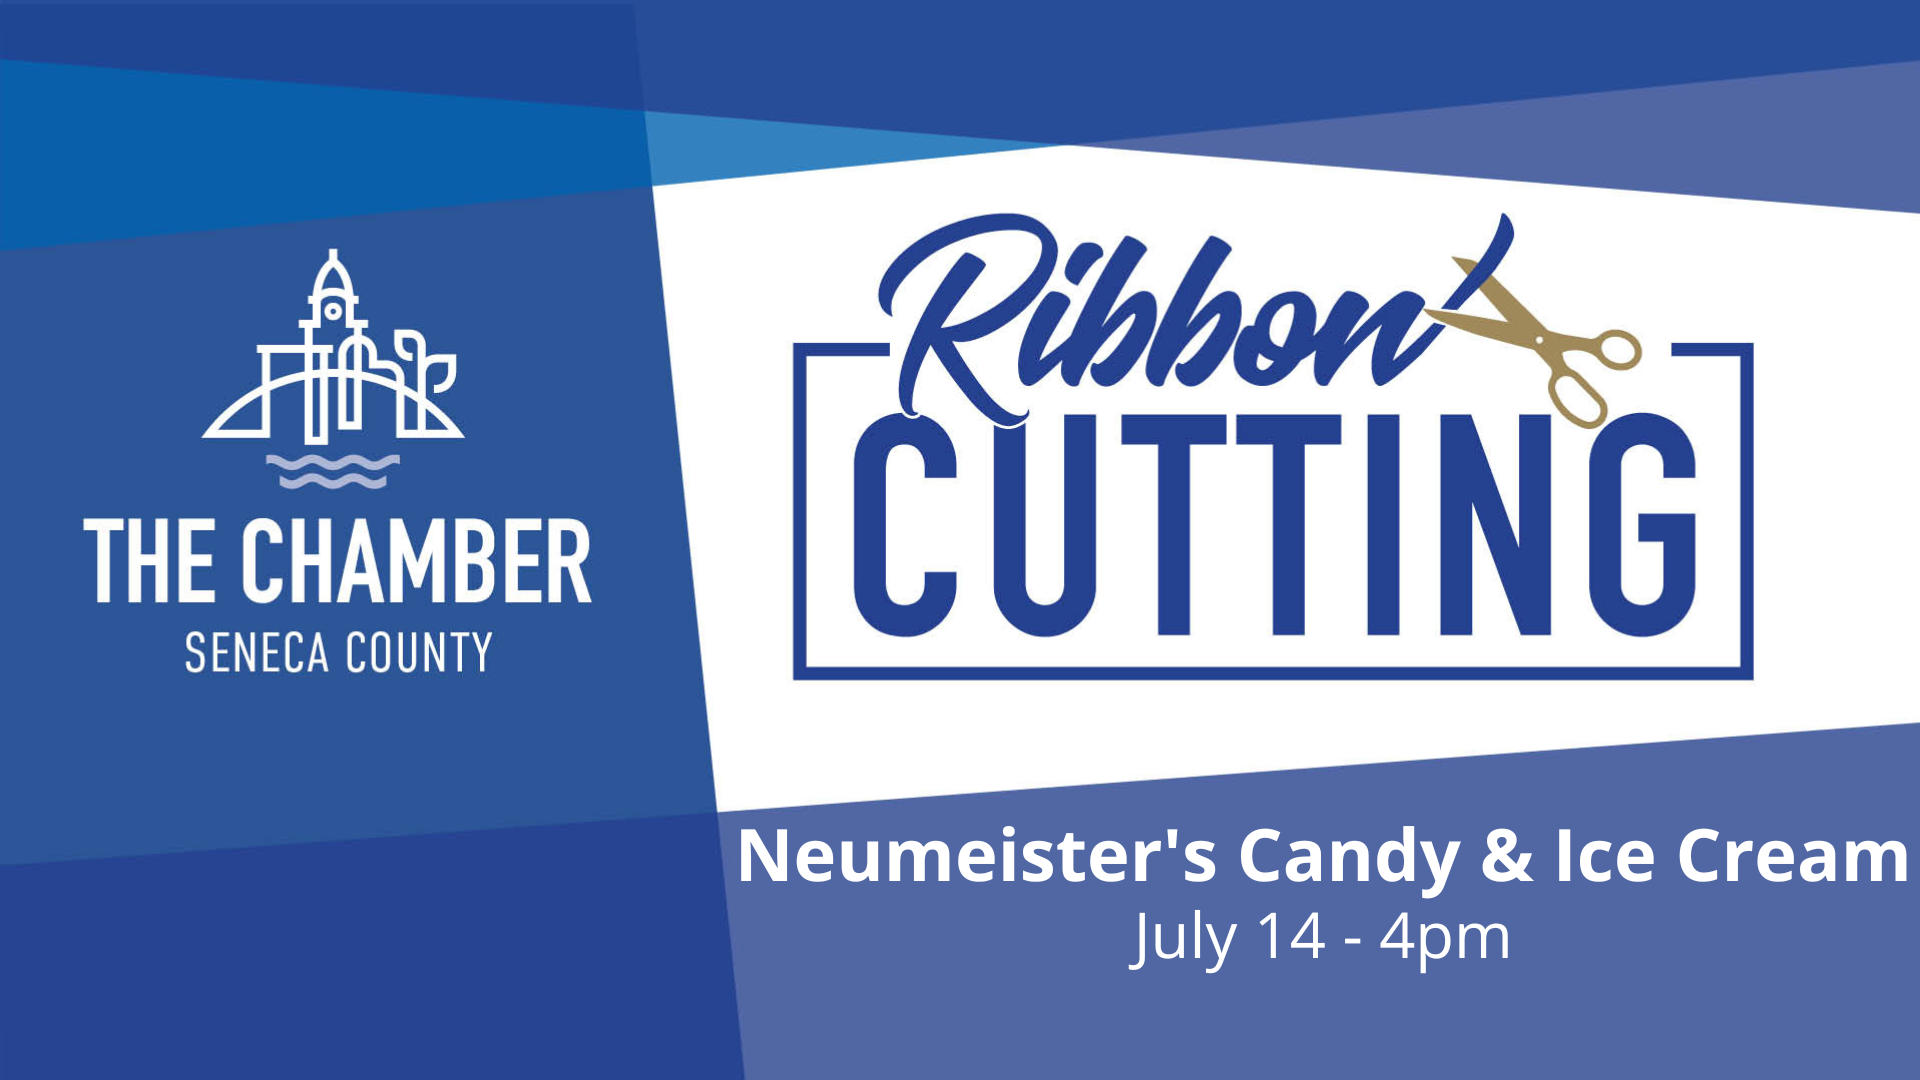 Ribbon Cutting Neumeister's Candy & Ice Cream